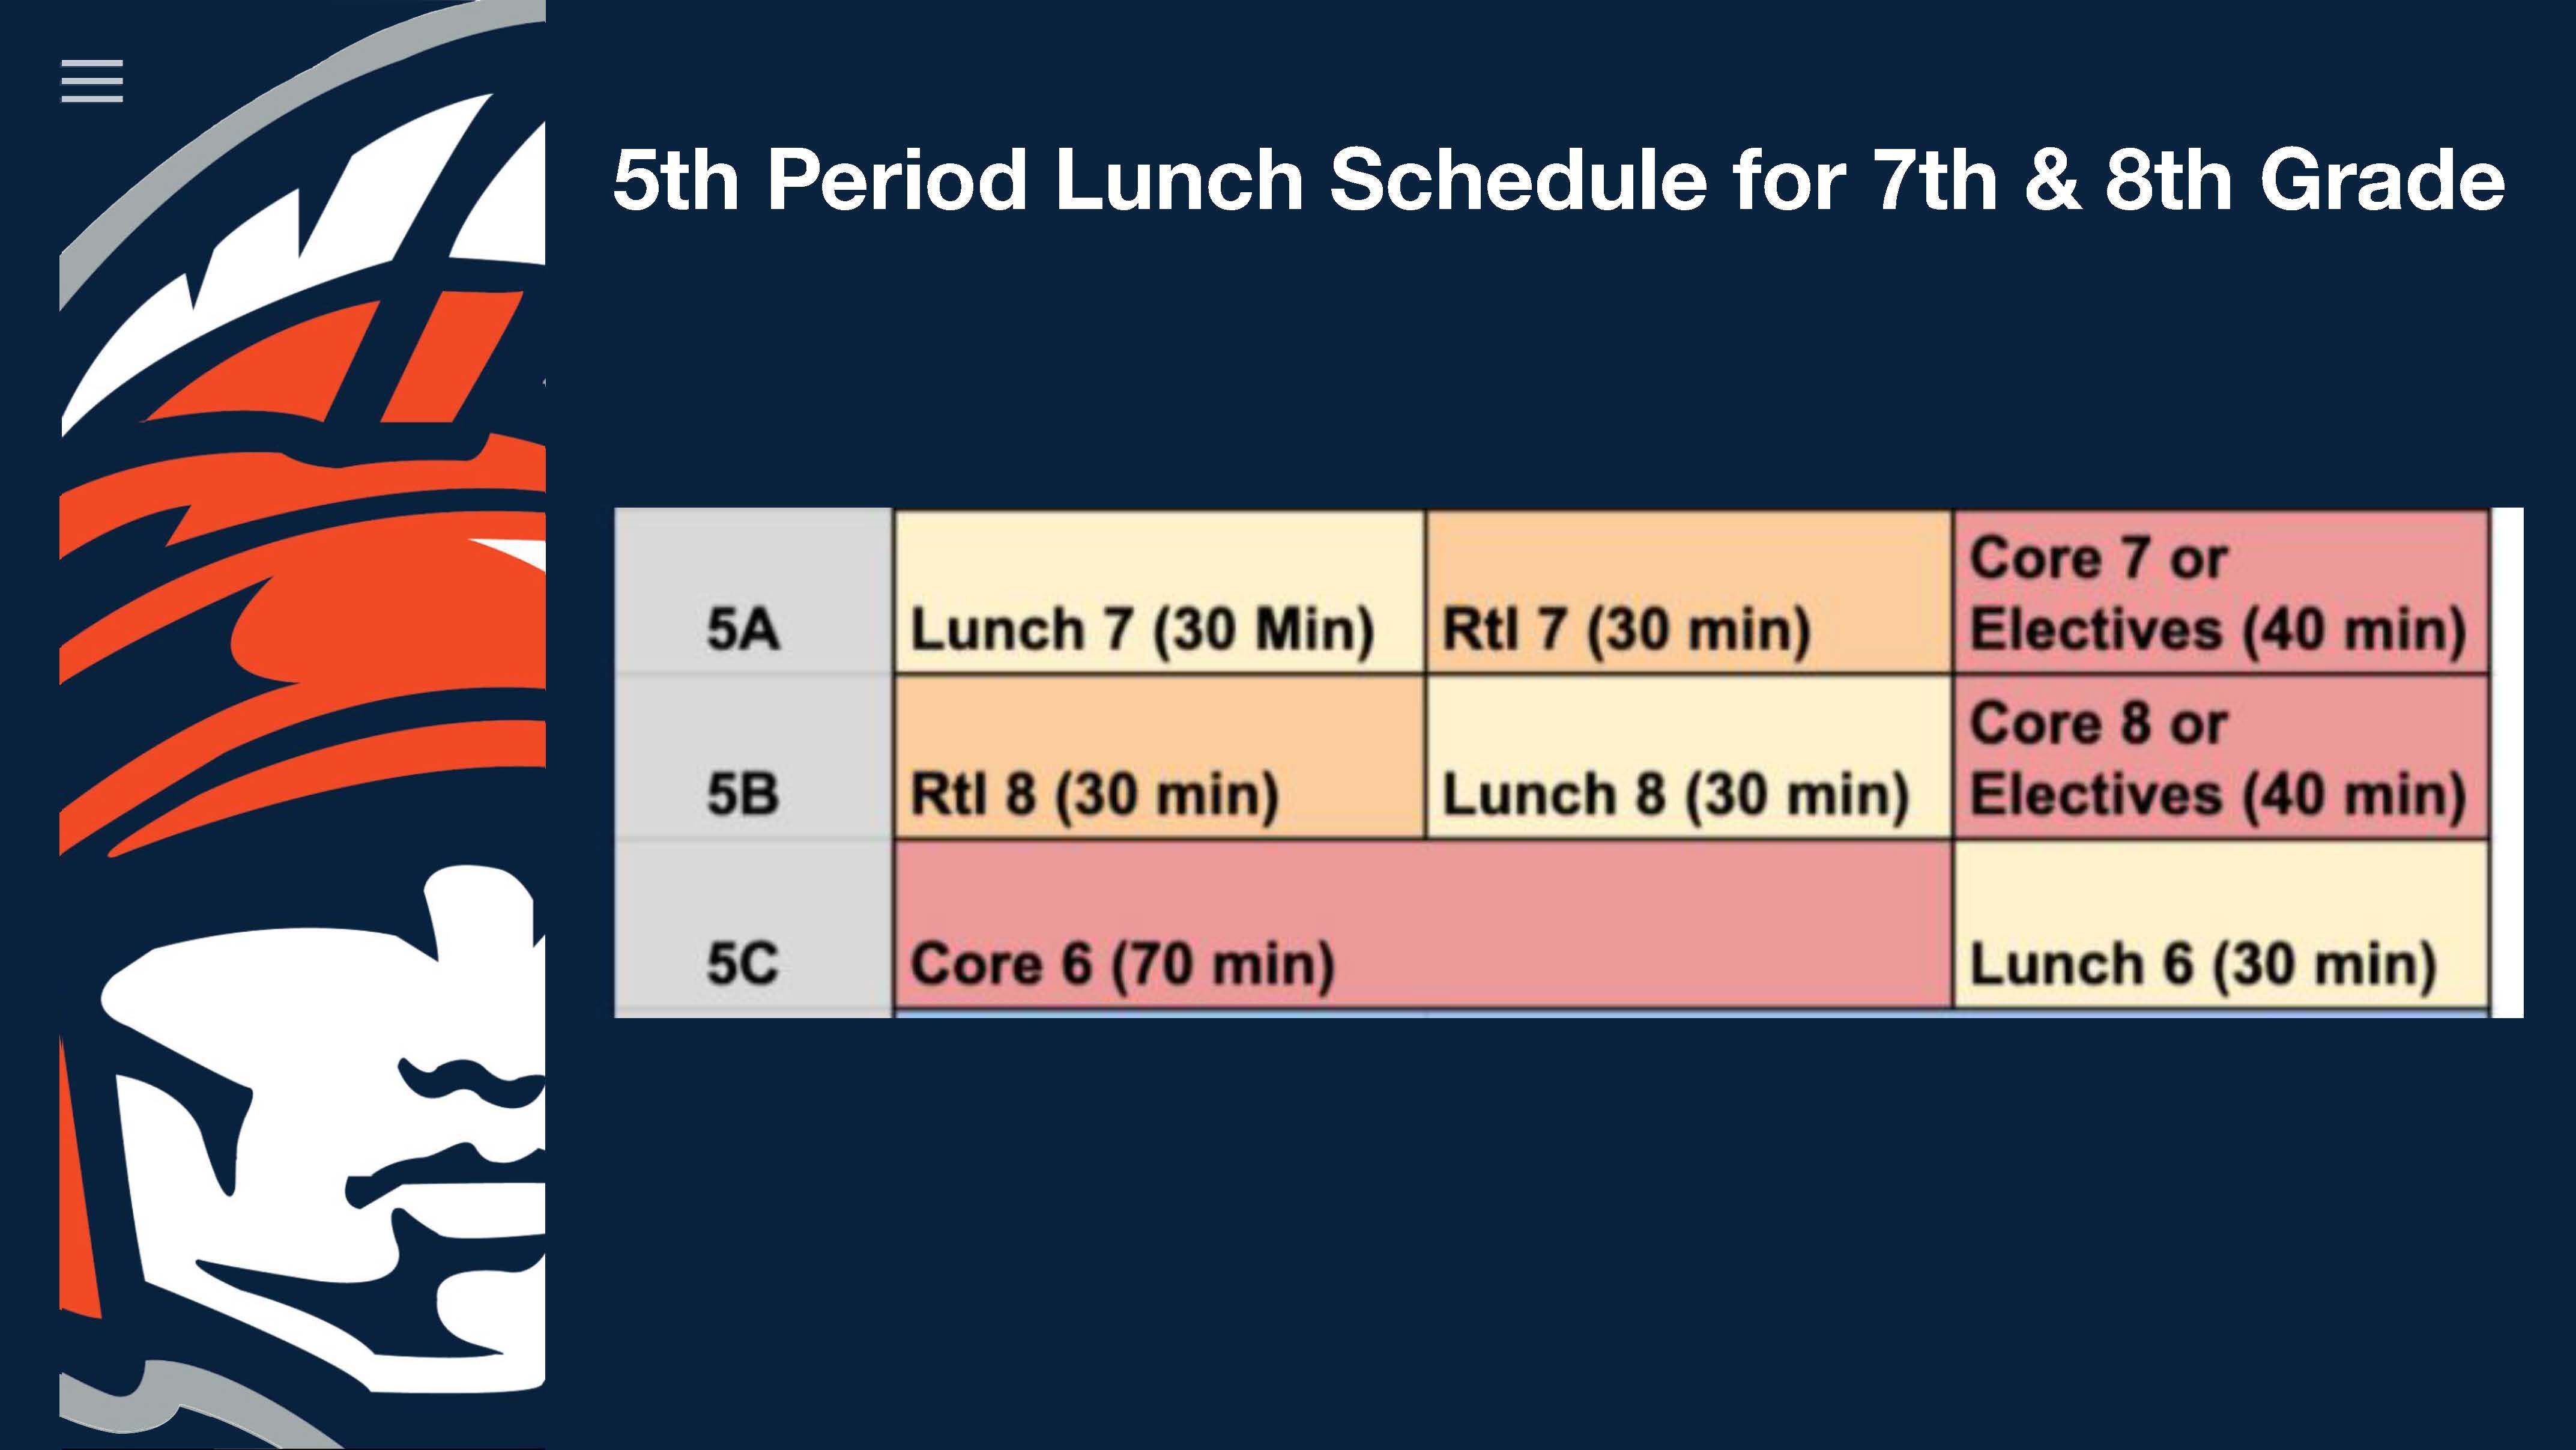 Lunch Schedule for 7th & 8th Grade